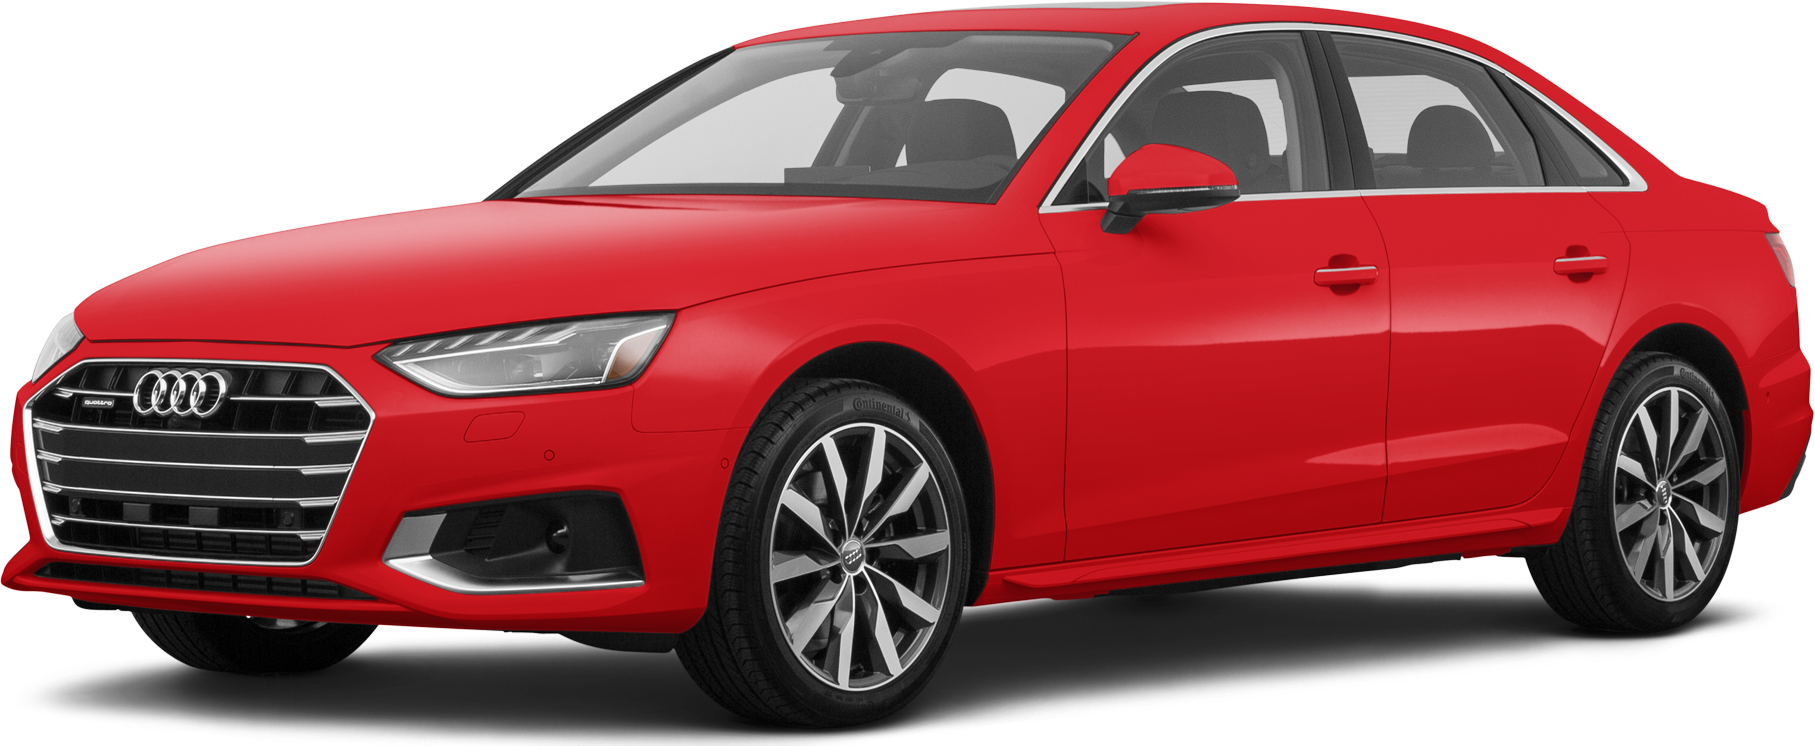 New Audi A4 Reviews, Pricing & Specs | Kelley Blue